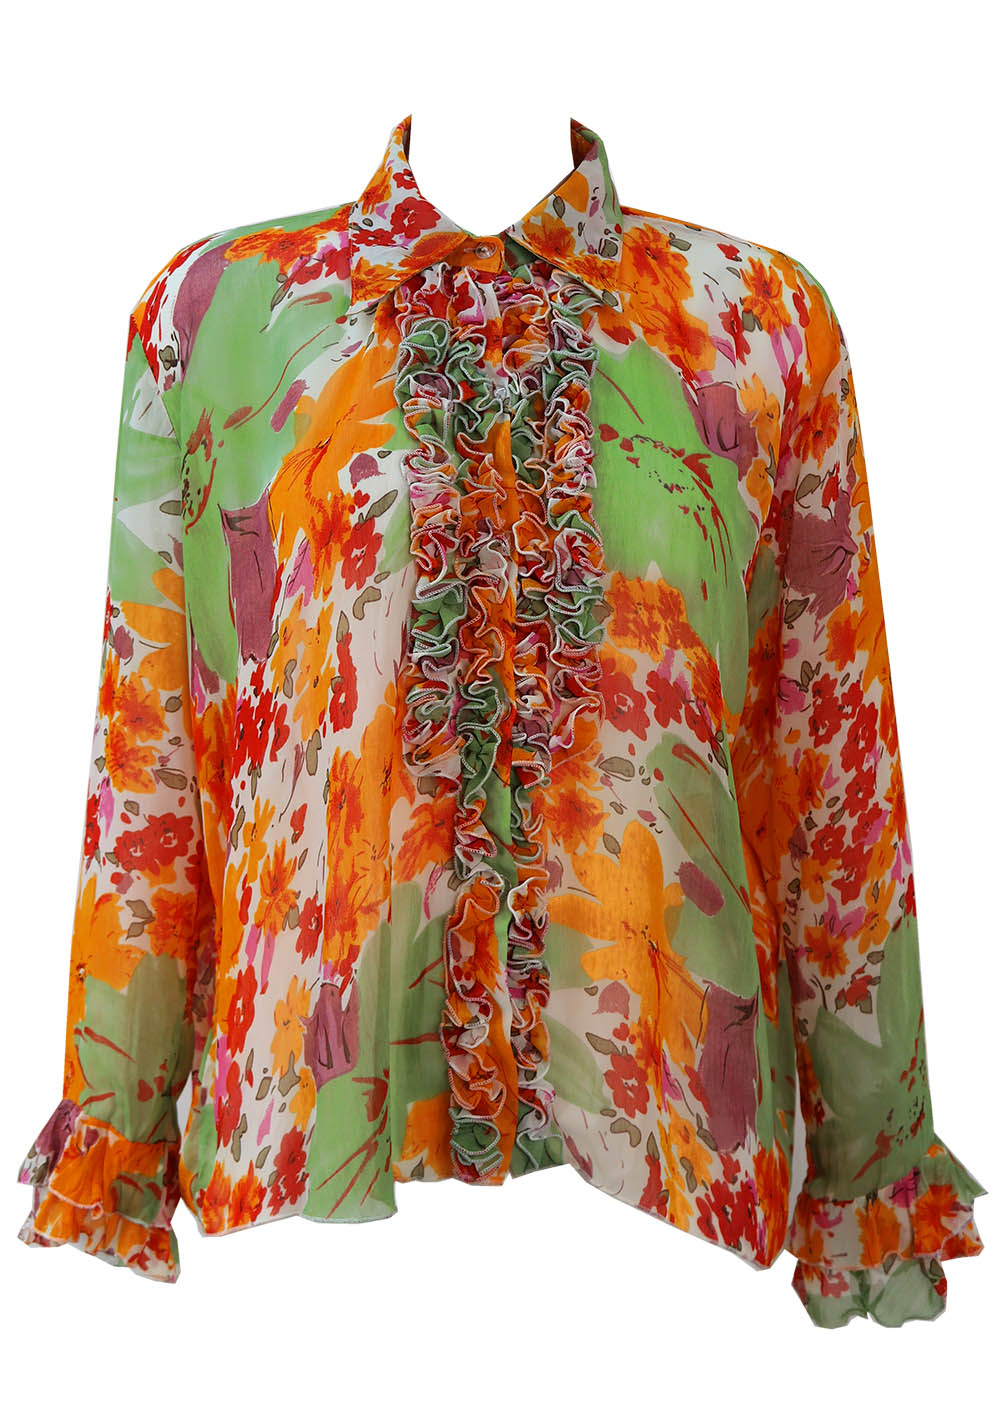 Semi Sheer Green & Orange Floral Blouse with Ruffle Detail - L/XL ...